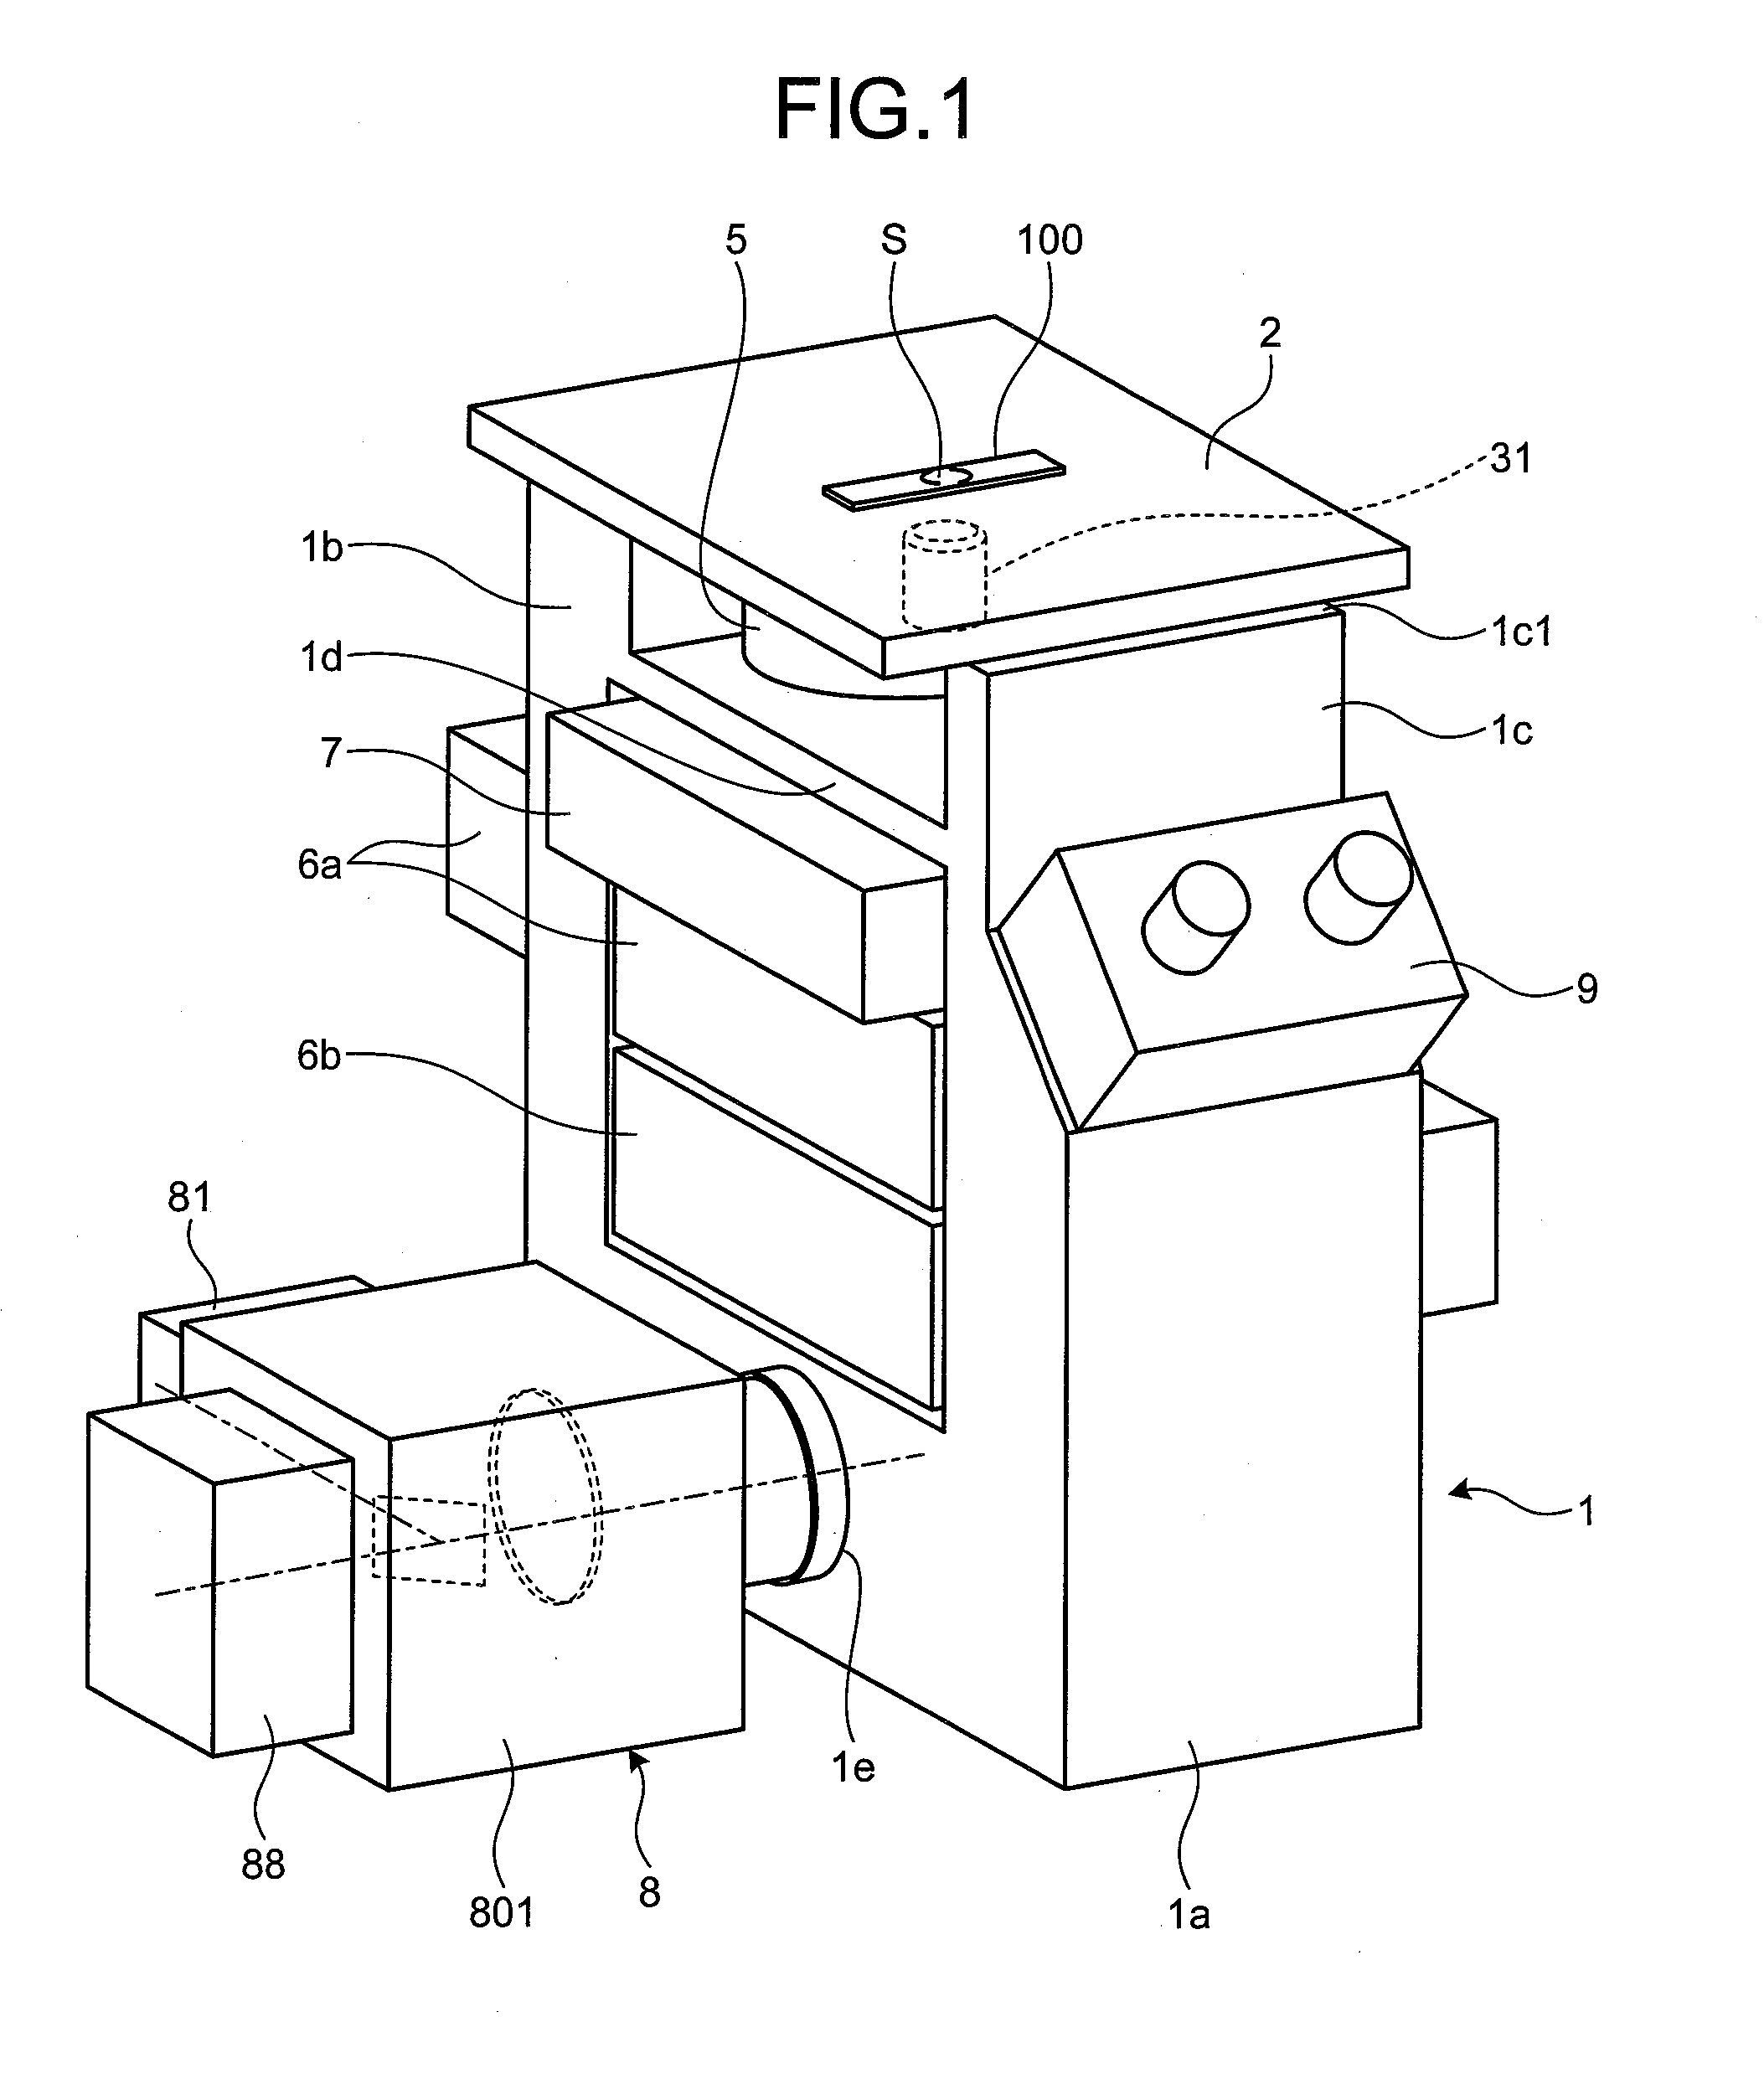 Inverted microscope system